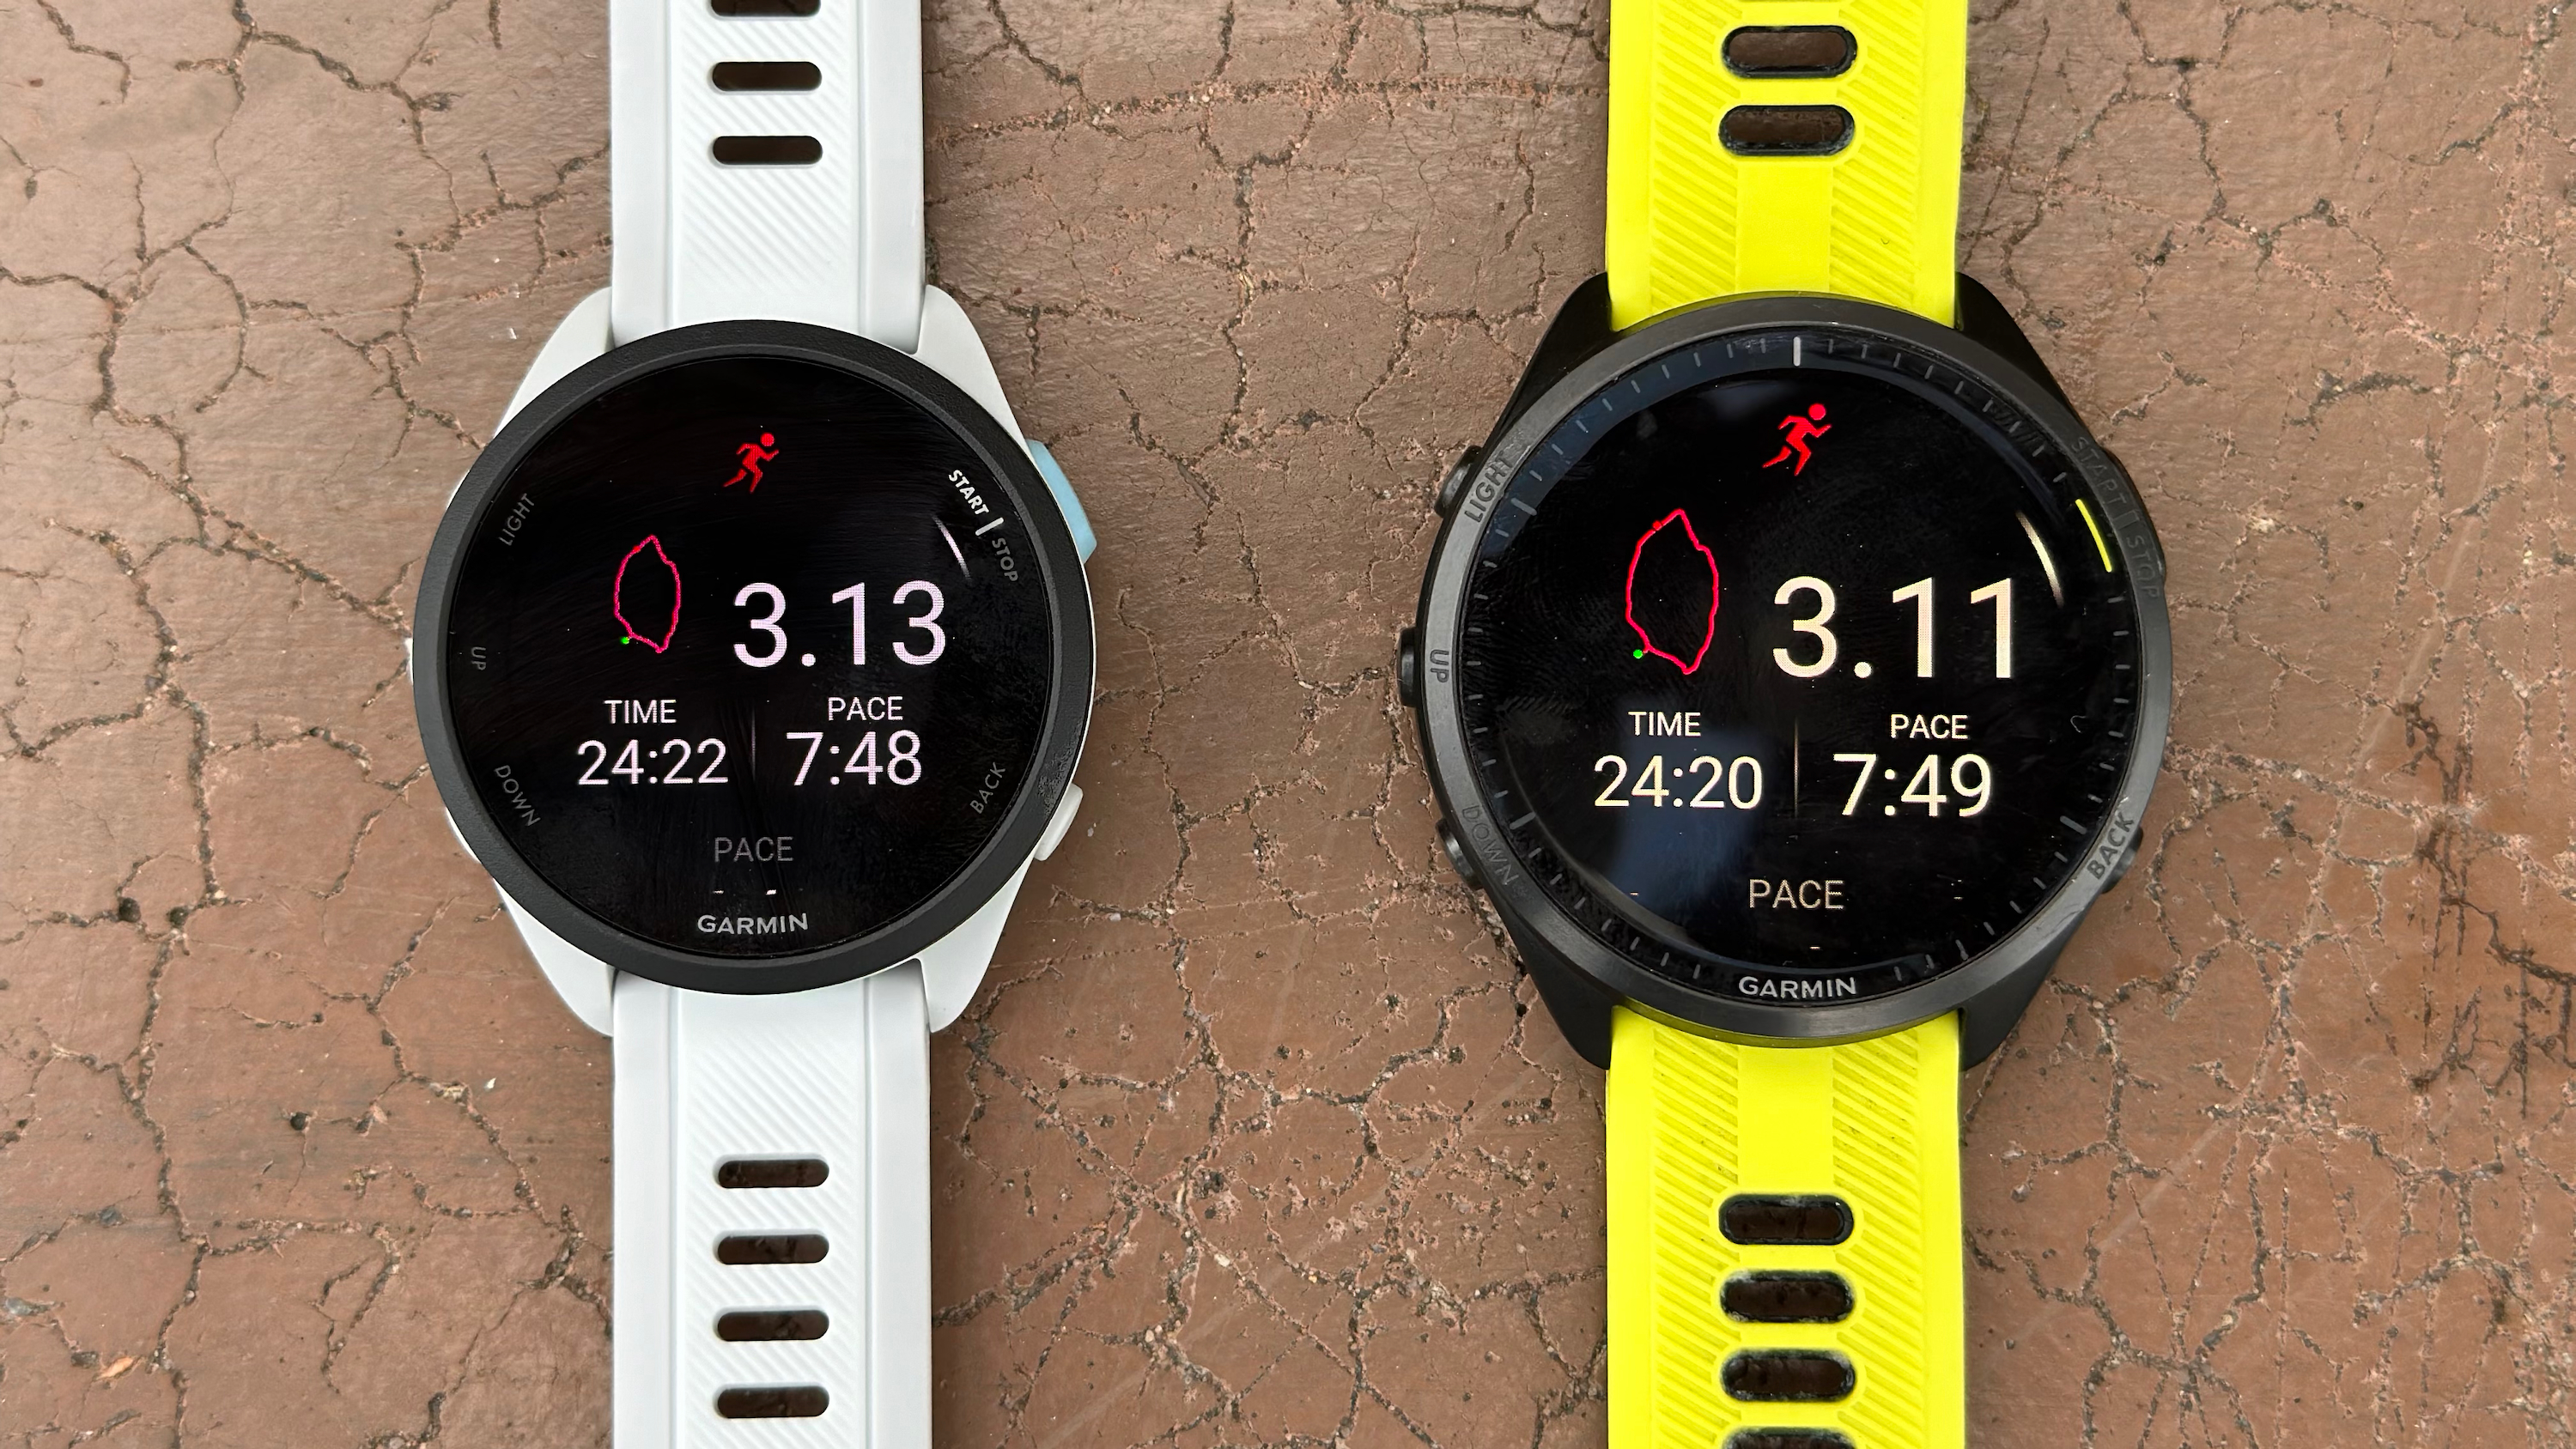 The Garmin Forerunner 165 and 965 side-by-side on a bench, showing near-identical distance and pace after a run activity.